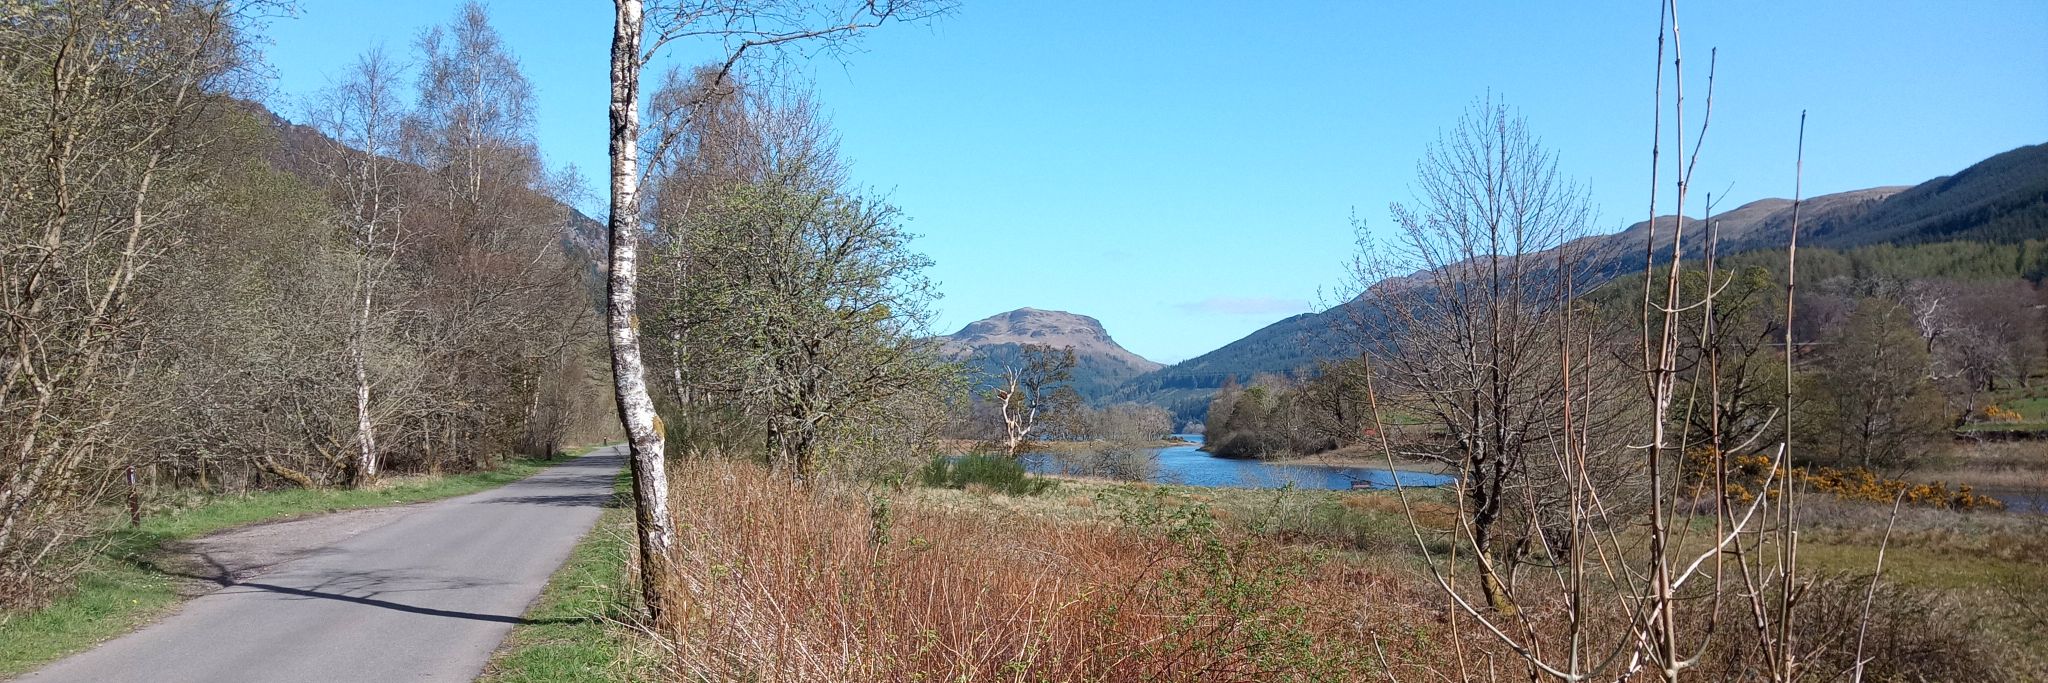 The Rob Roy Way alongside Loch Lubnaig from Callender to Strathyre